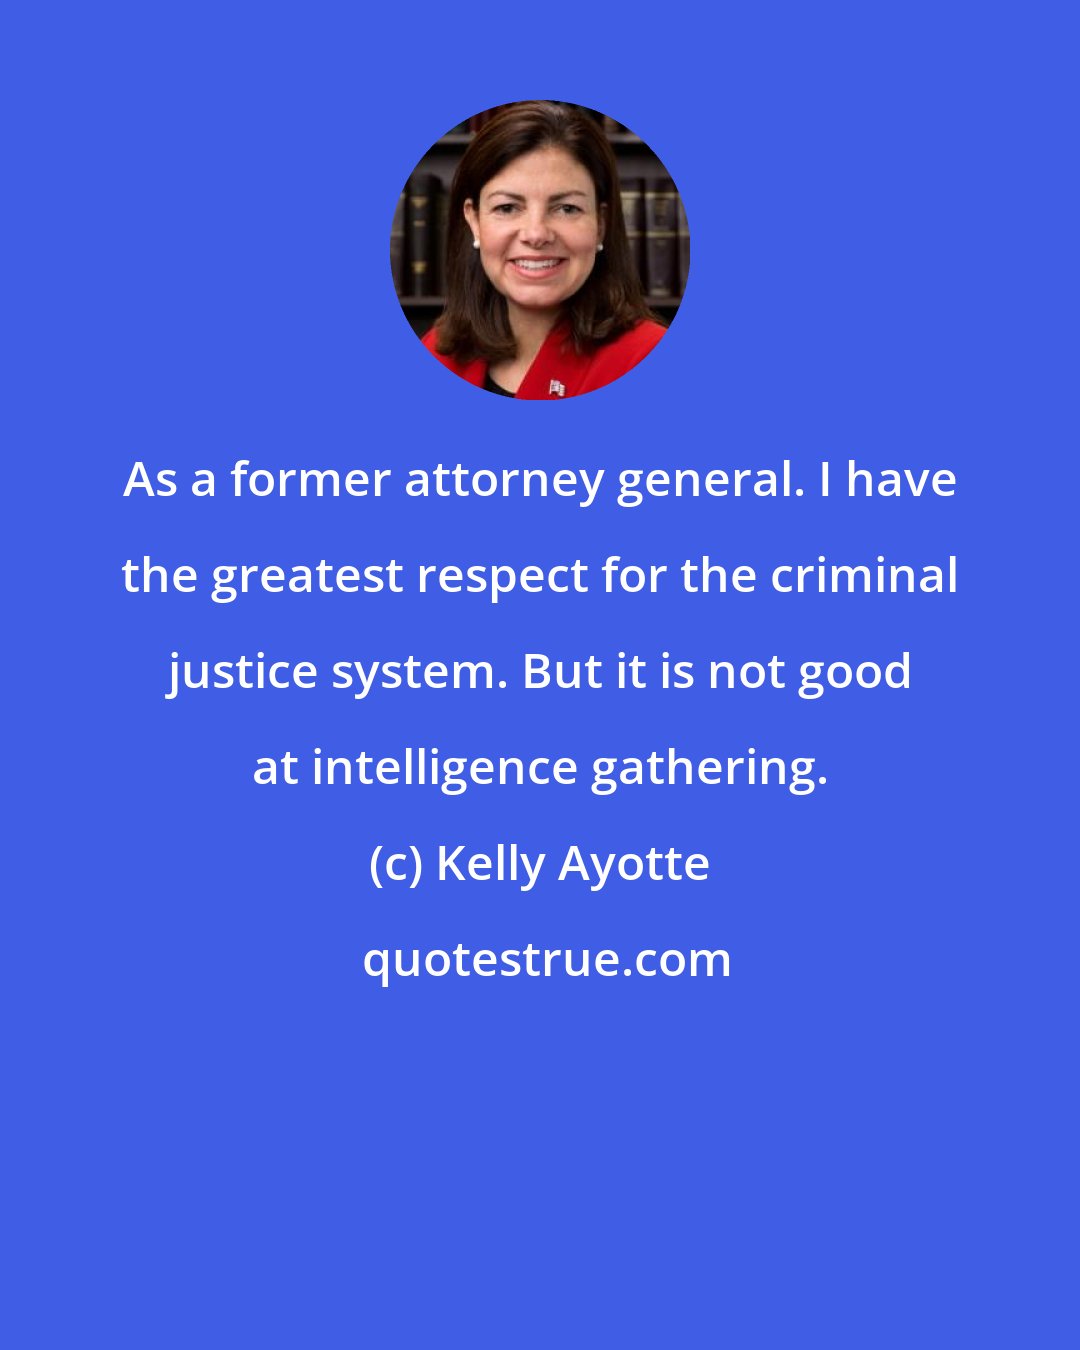 Kelly Ayotte: As a former attorney general. I have the greatest respect for the criminal justice system. But it is not good at intelligence gathering.